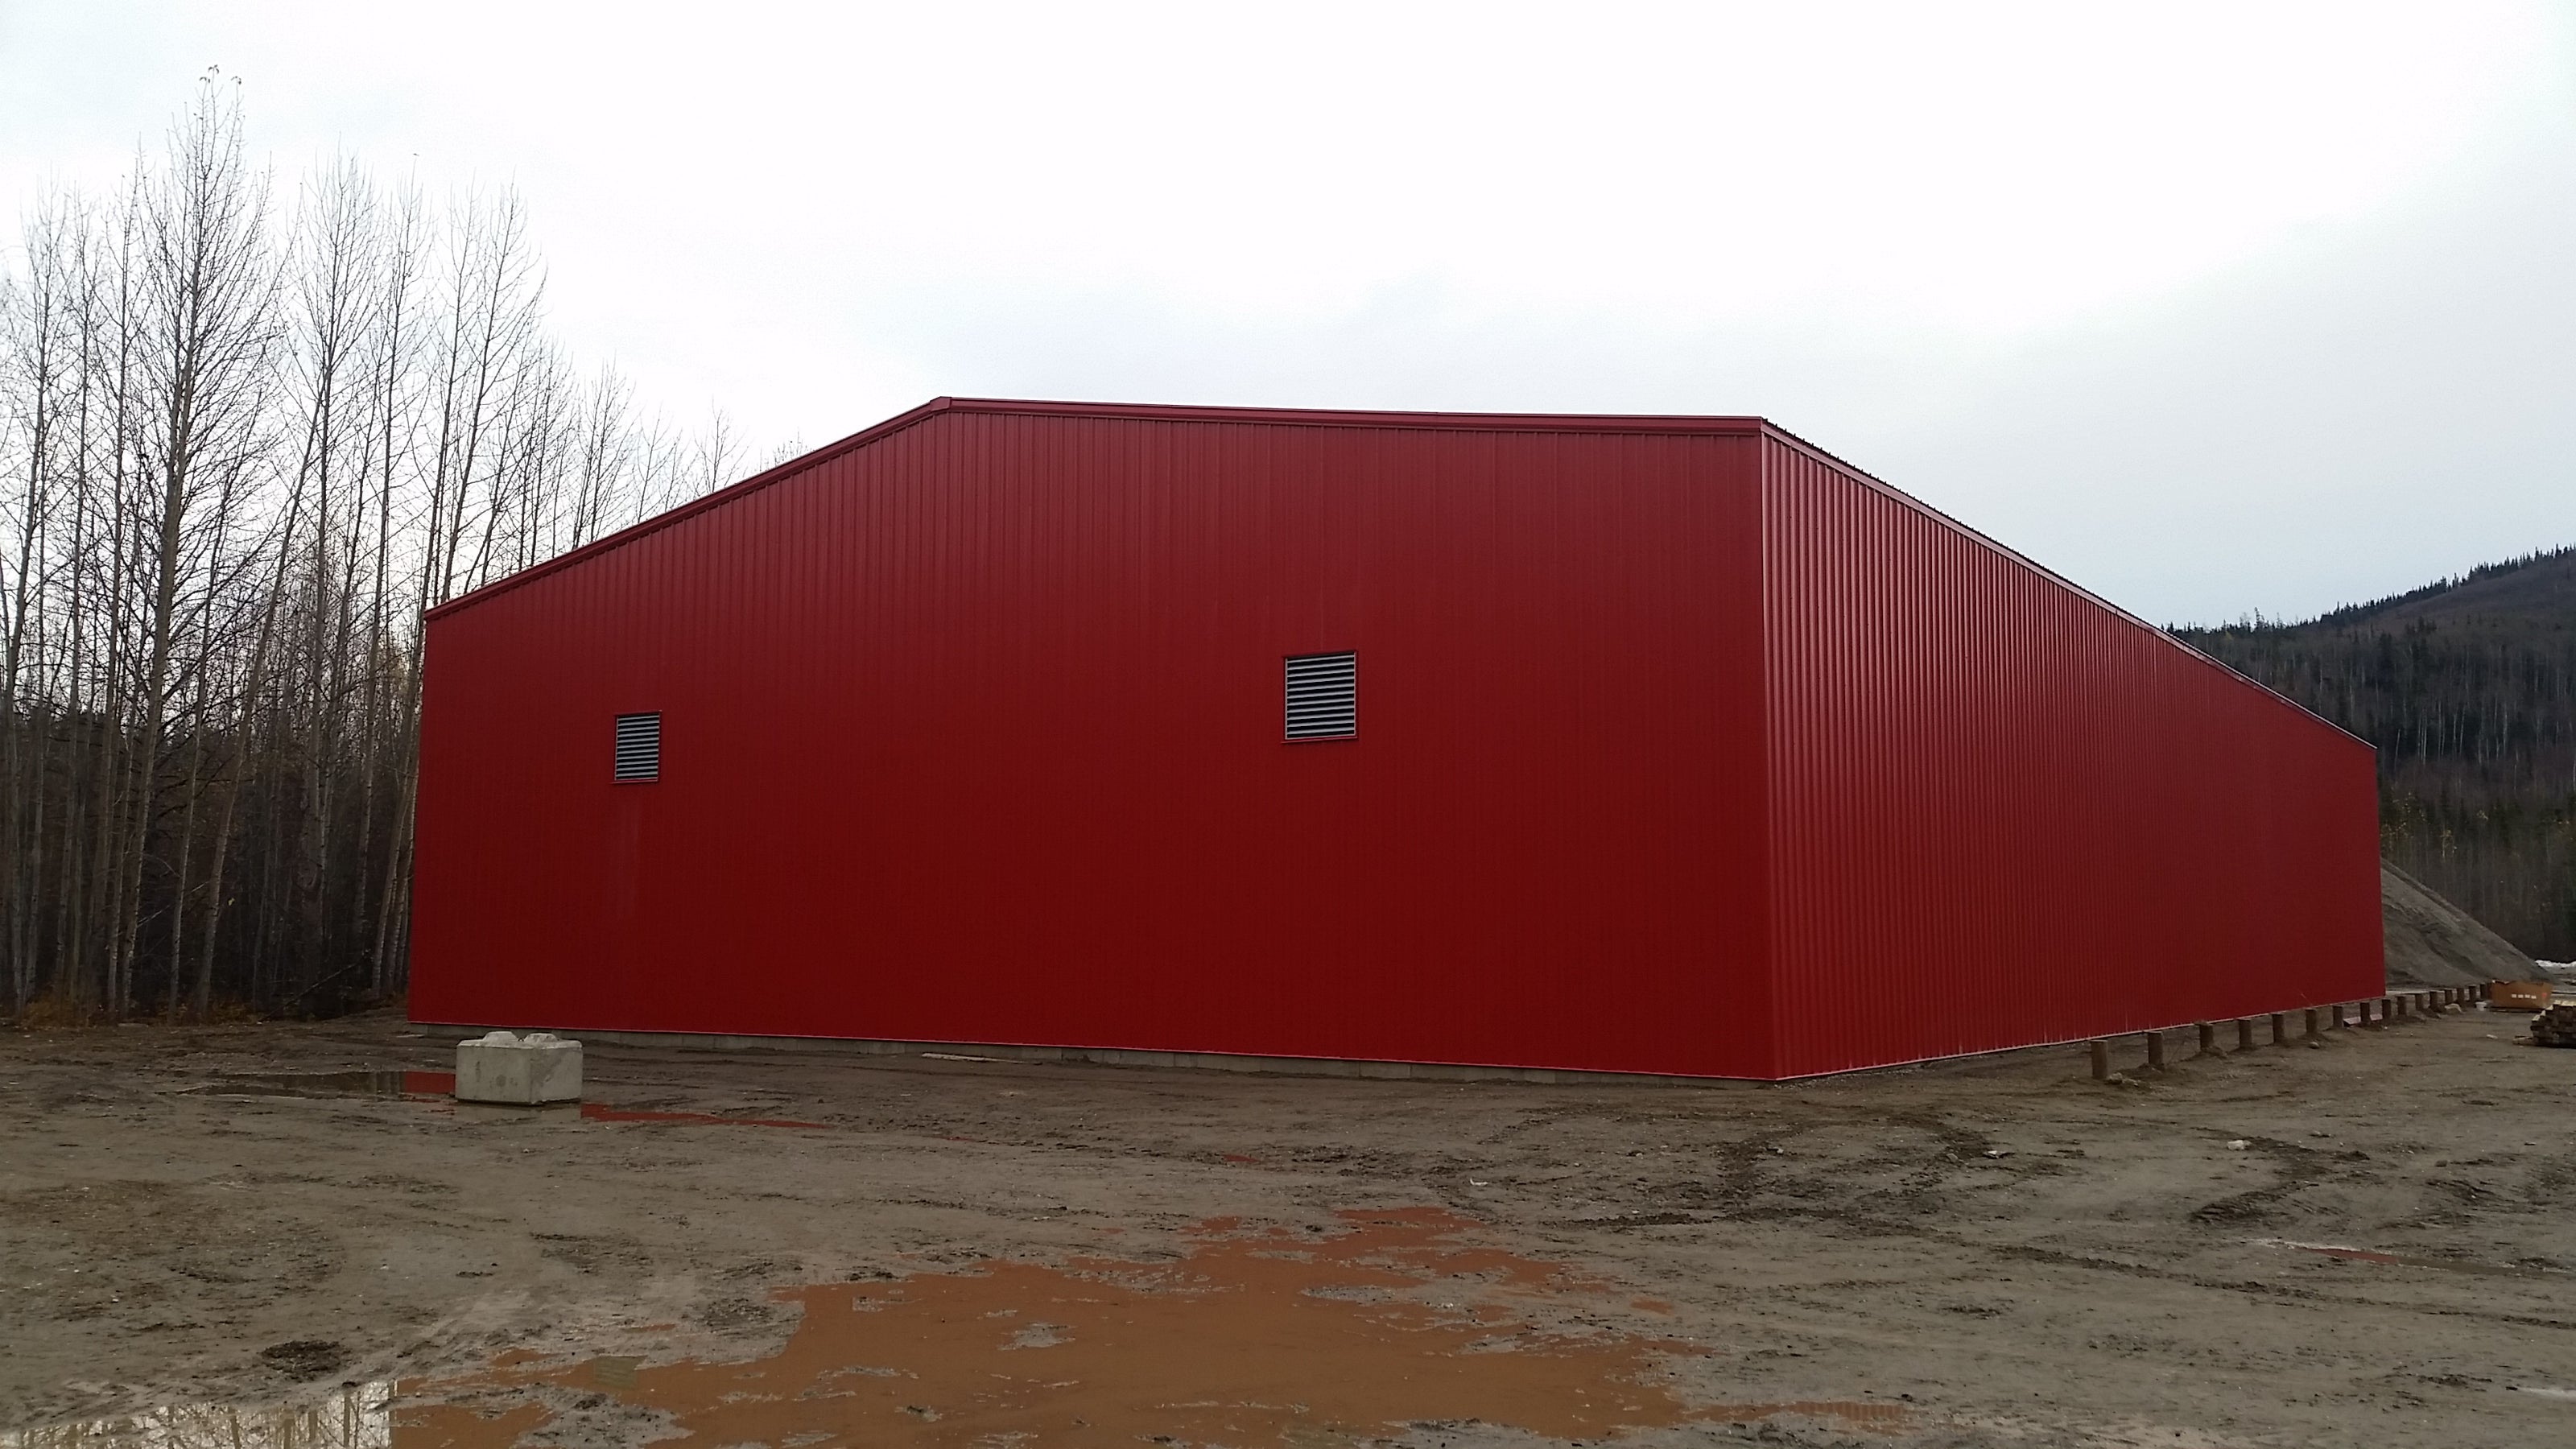 Rigid Frame Metal Building For Road Salt Storage with Louver Vents - Rear View